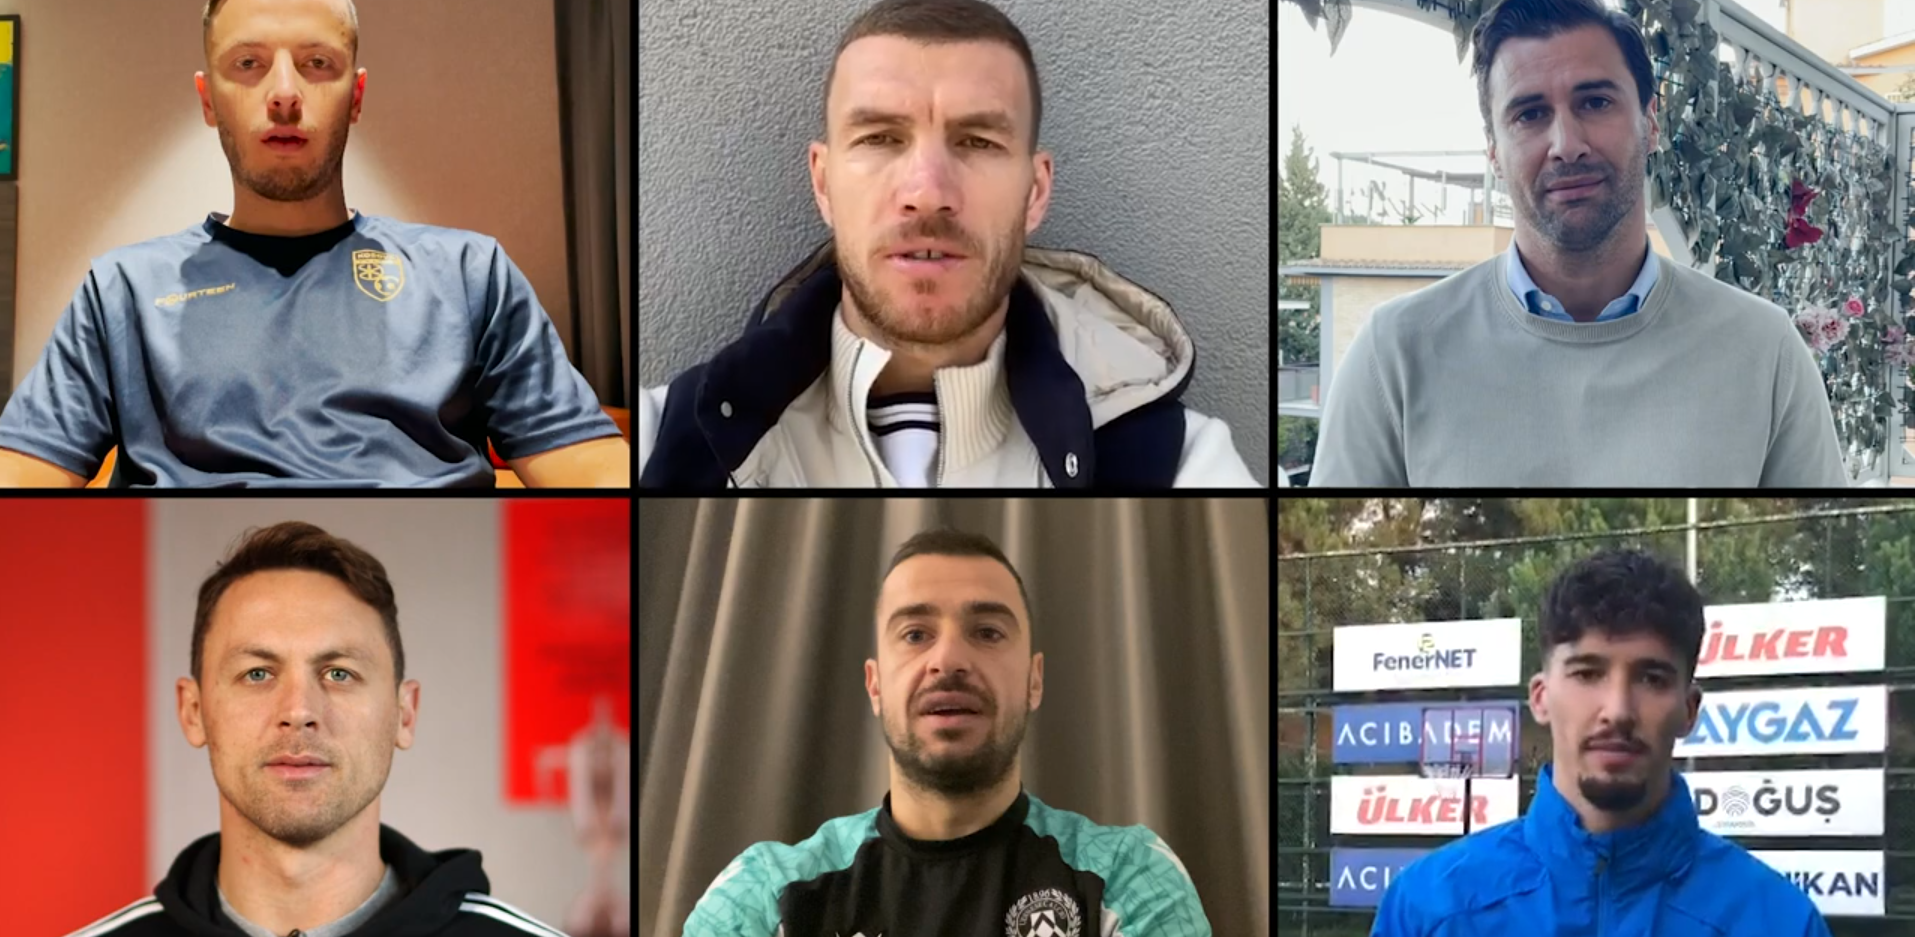 Football Stars Unite to End Toxic Masculinity and Violence Against Women